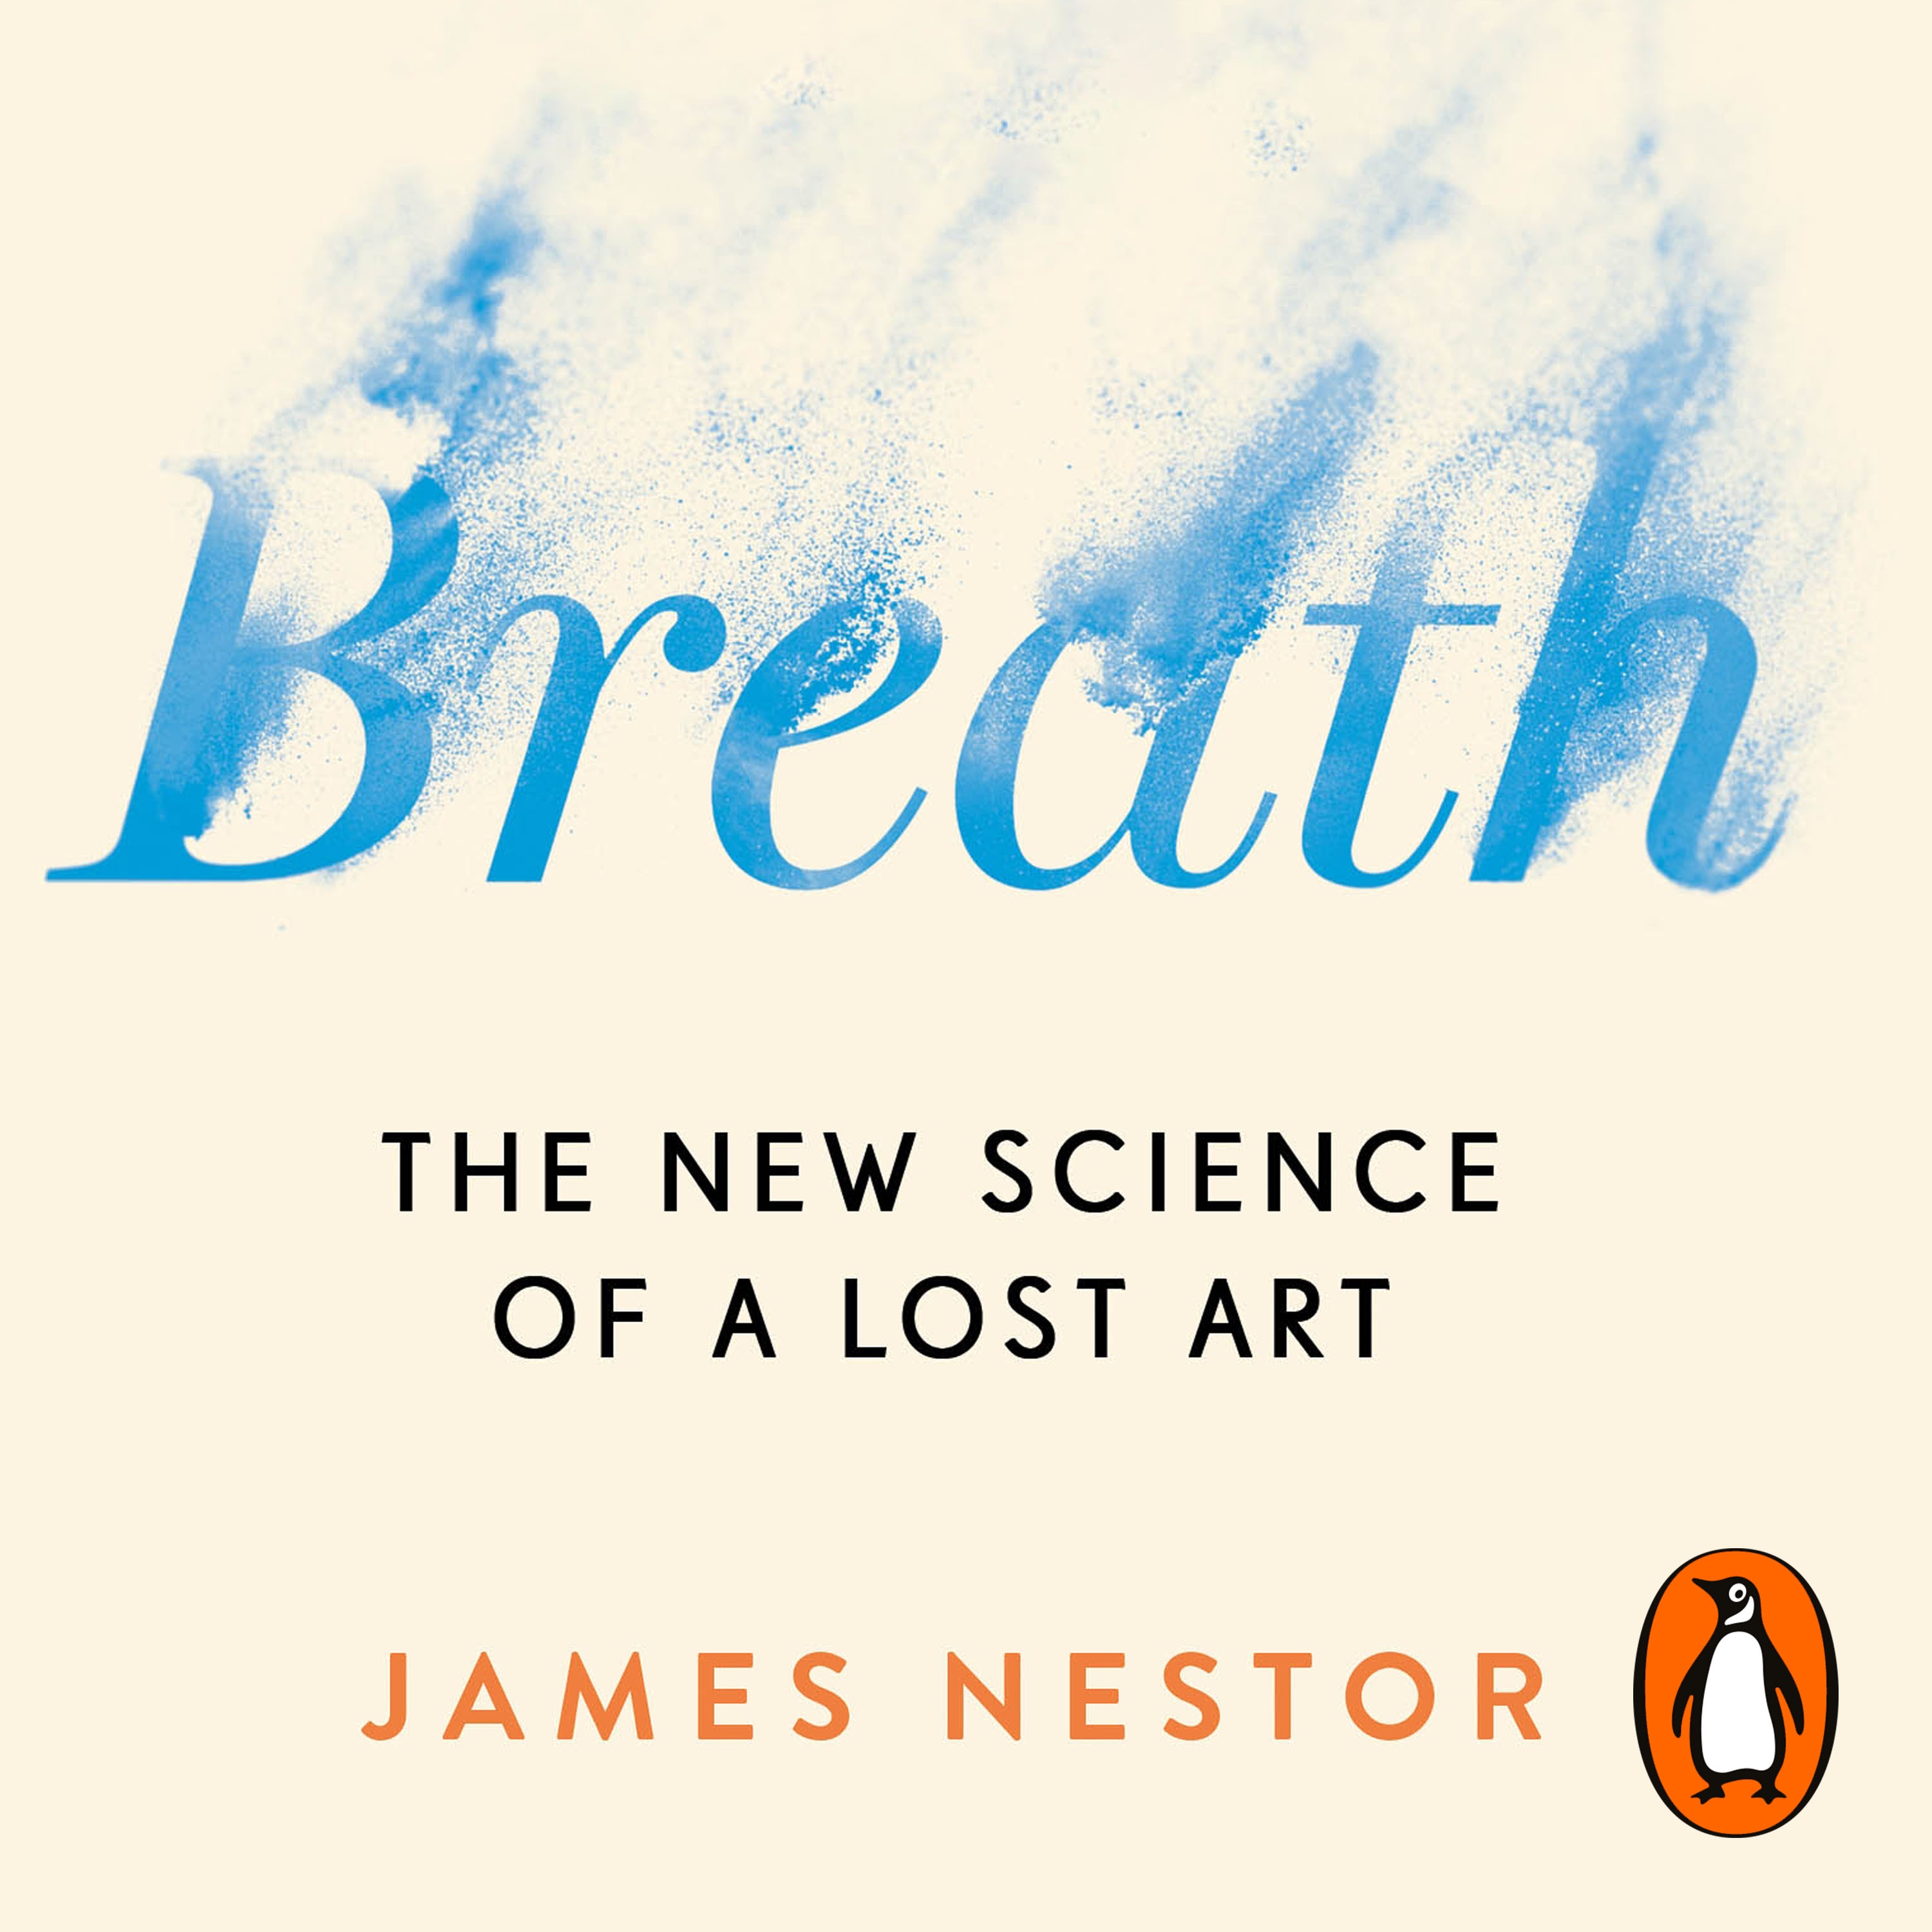 Audiobook image for Breath: a cream background with the title in blue at the top, the letters drifting upwards to imitate breath. Subtitle "The new science of a lost art" and the author name are arranged below it.